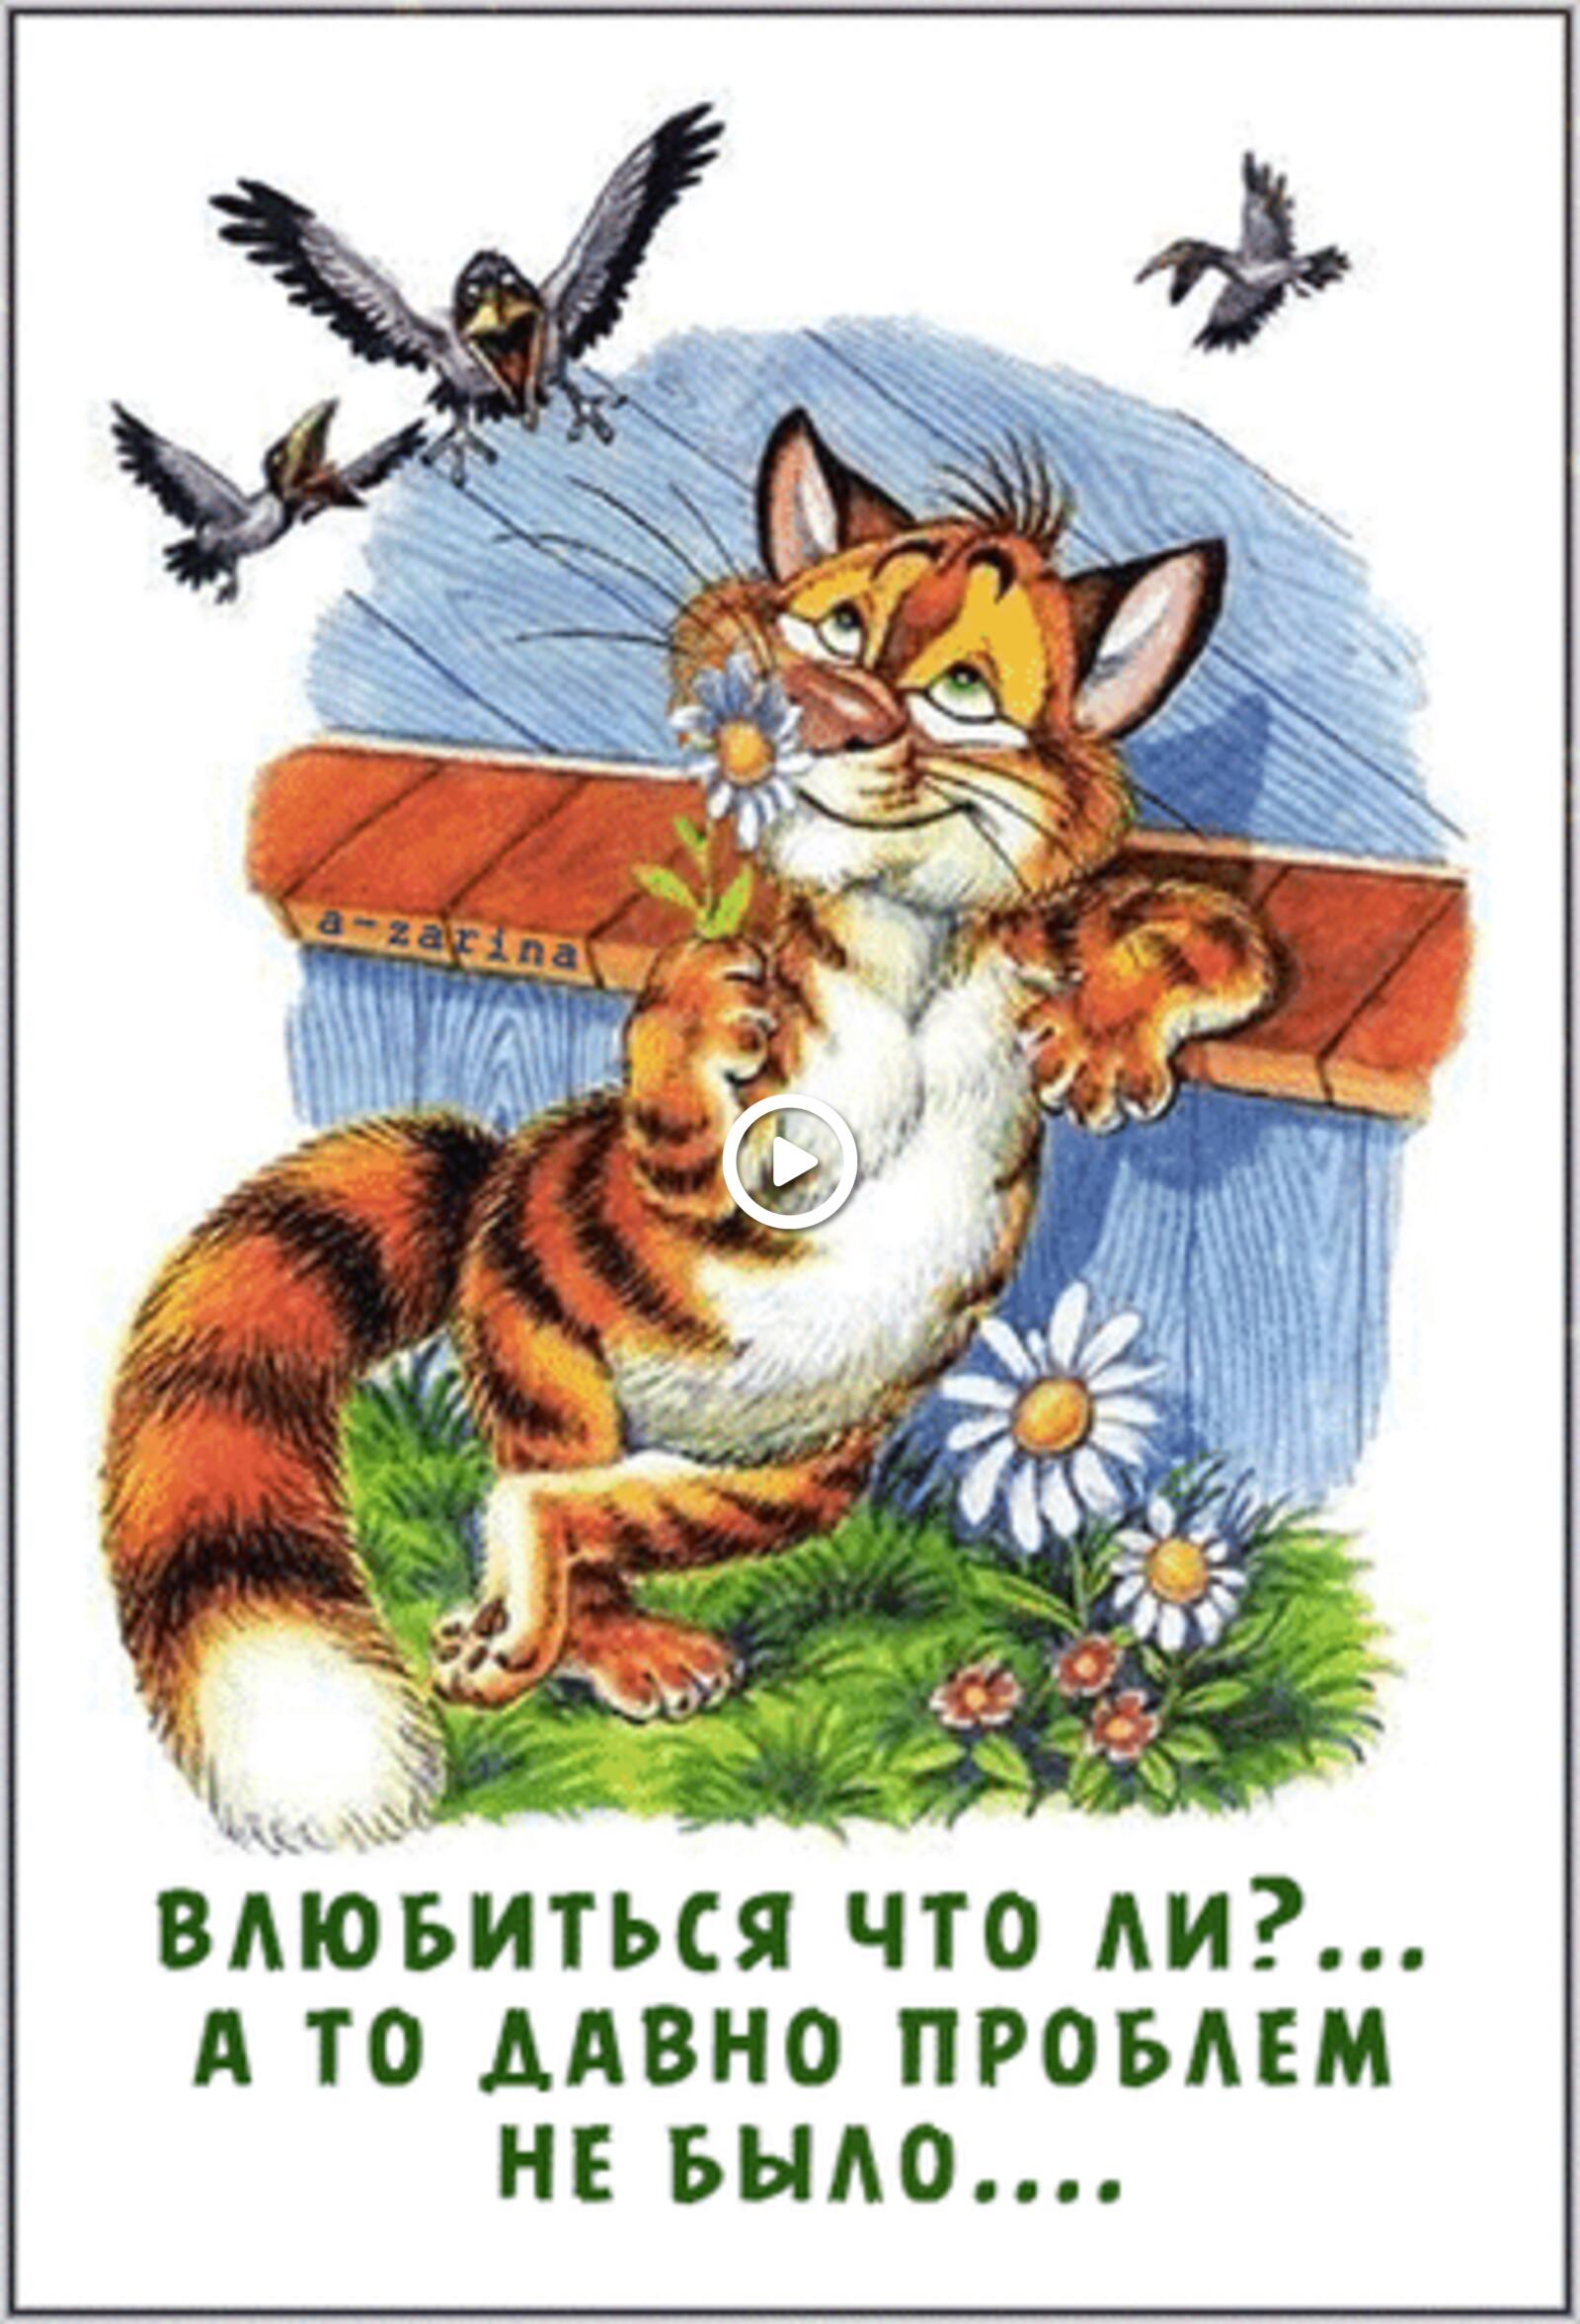 A postcard on the subject of romashka tiger humor for free